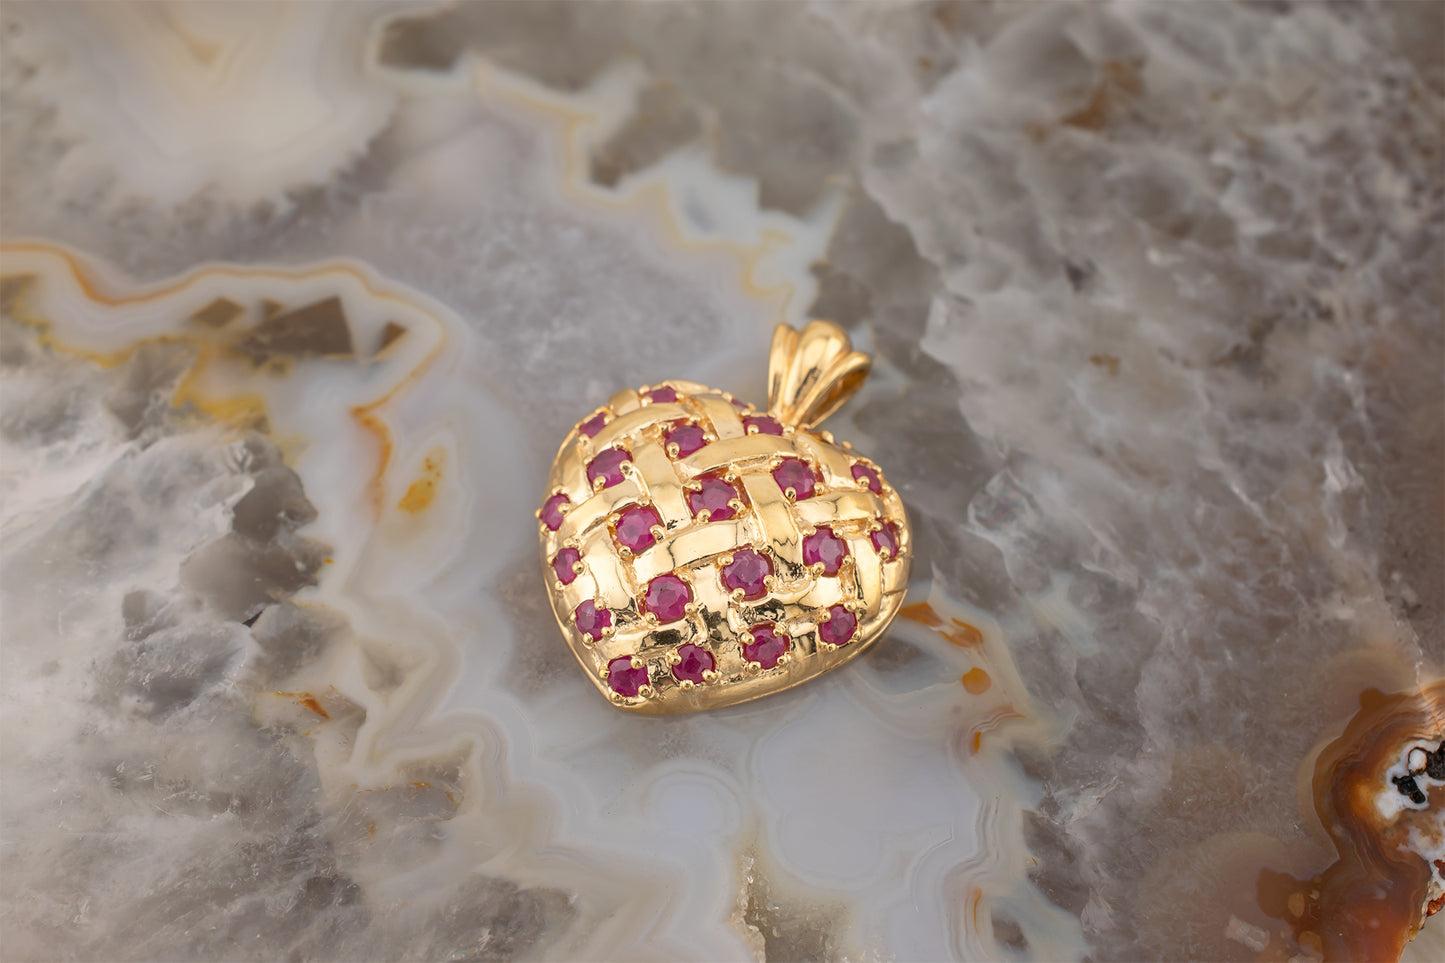 Circa 1990s Vintage 10 Karat Yellow Gold Lattice Design Quilted Heart Pendant Charm With Natural Rubies